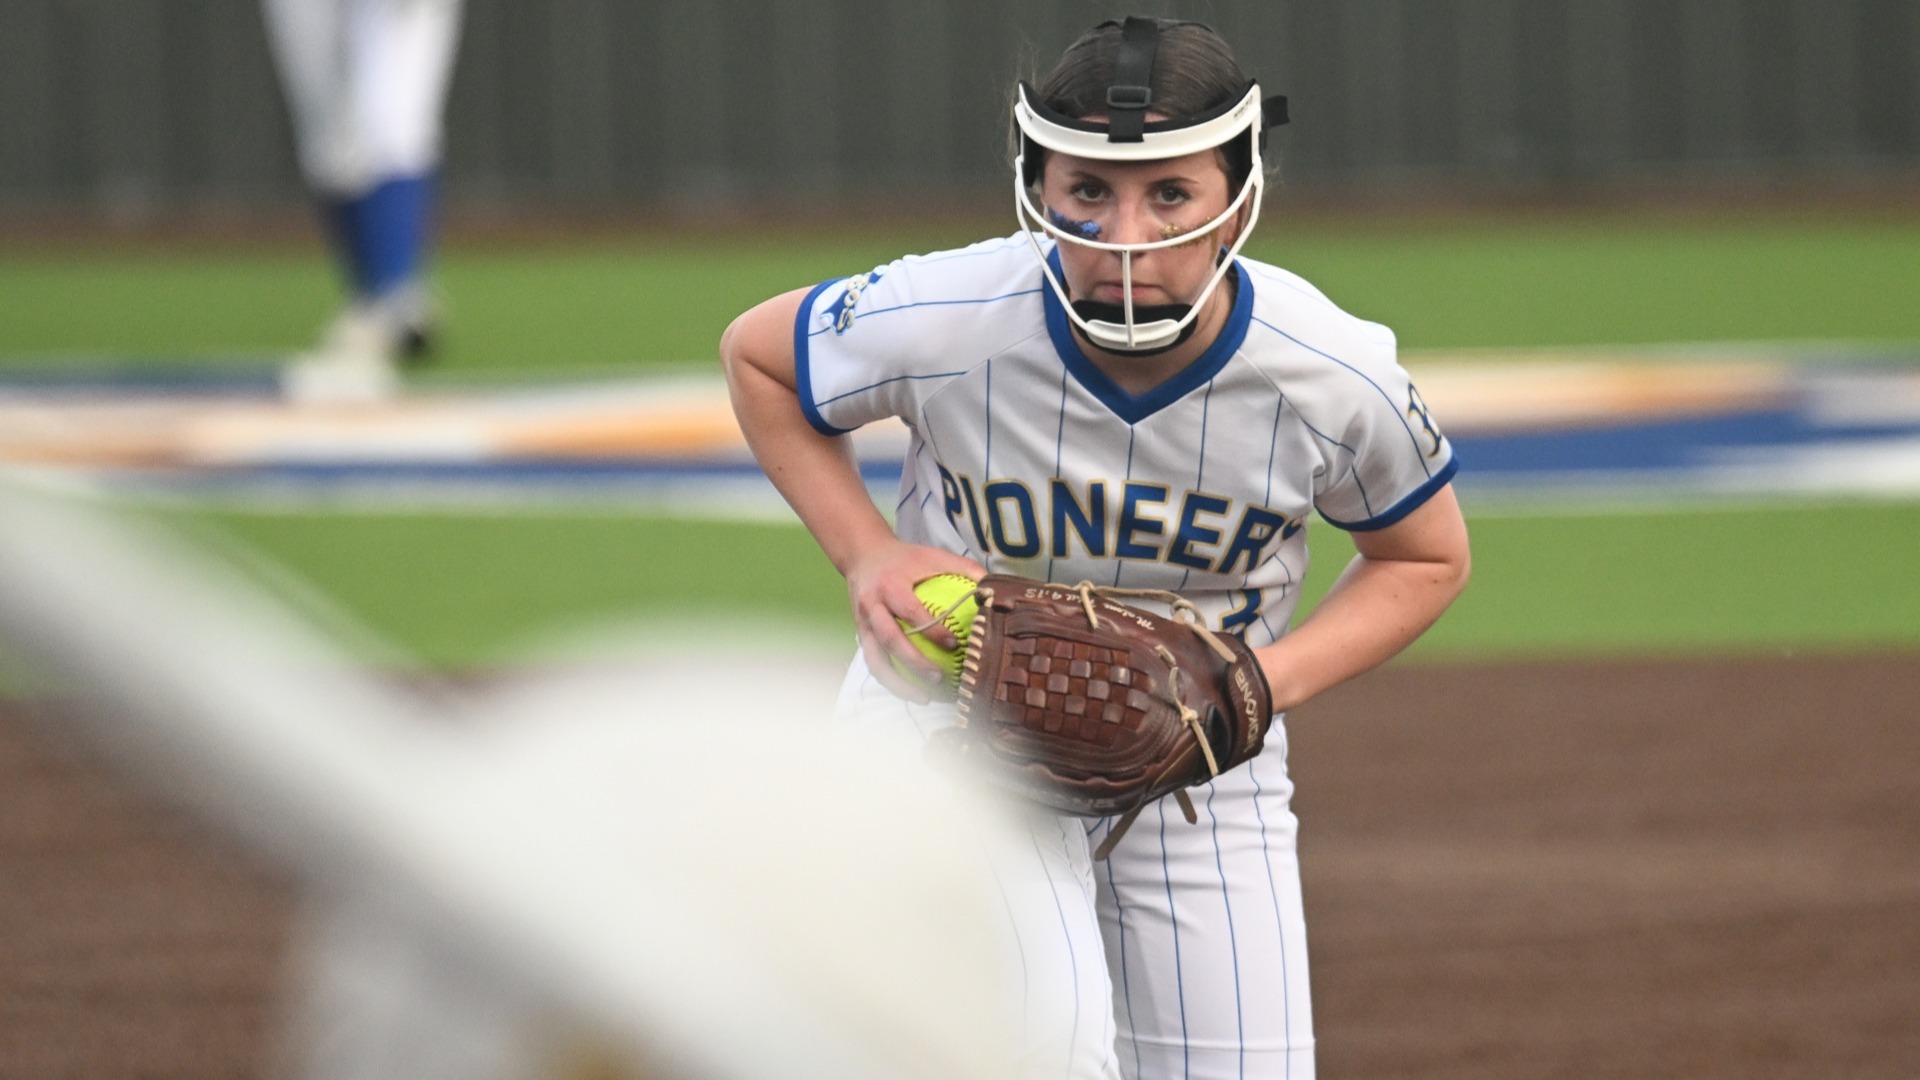 Boswell HSSlide 0 - SHUTOUT VICTORY: LADY PIONEERS LEVEL WITH TRINITY FOR FIRST PLACE IN DISTRICT 3-6A